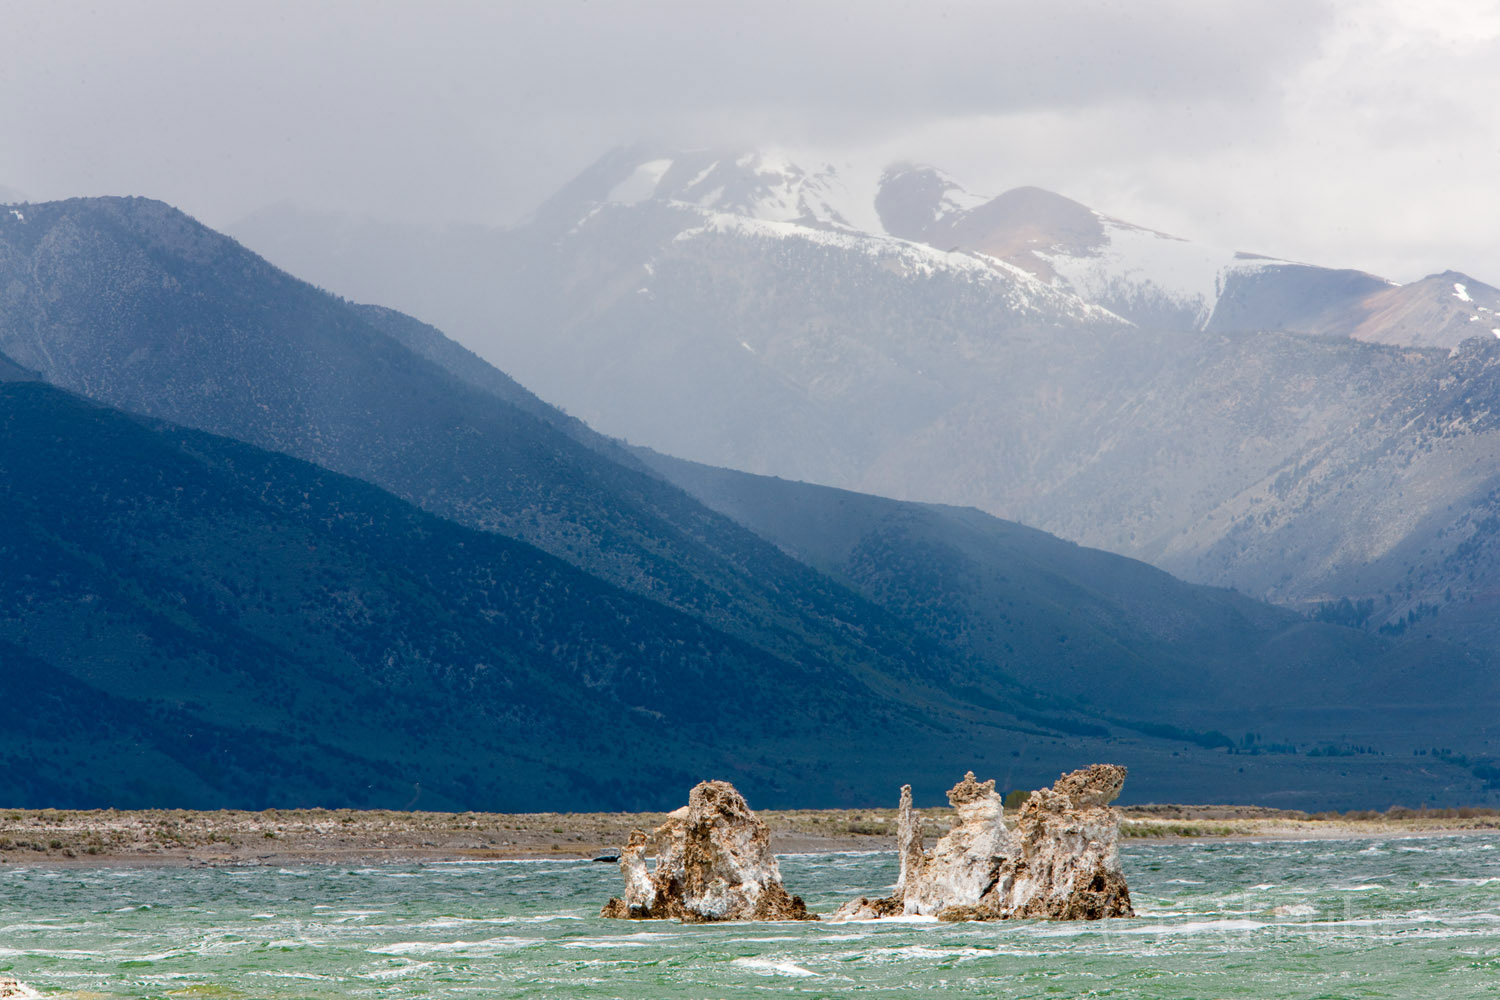 Storm clouds gather over the high country and Sierras that divide Mono Lake from Yosemite.